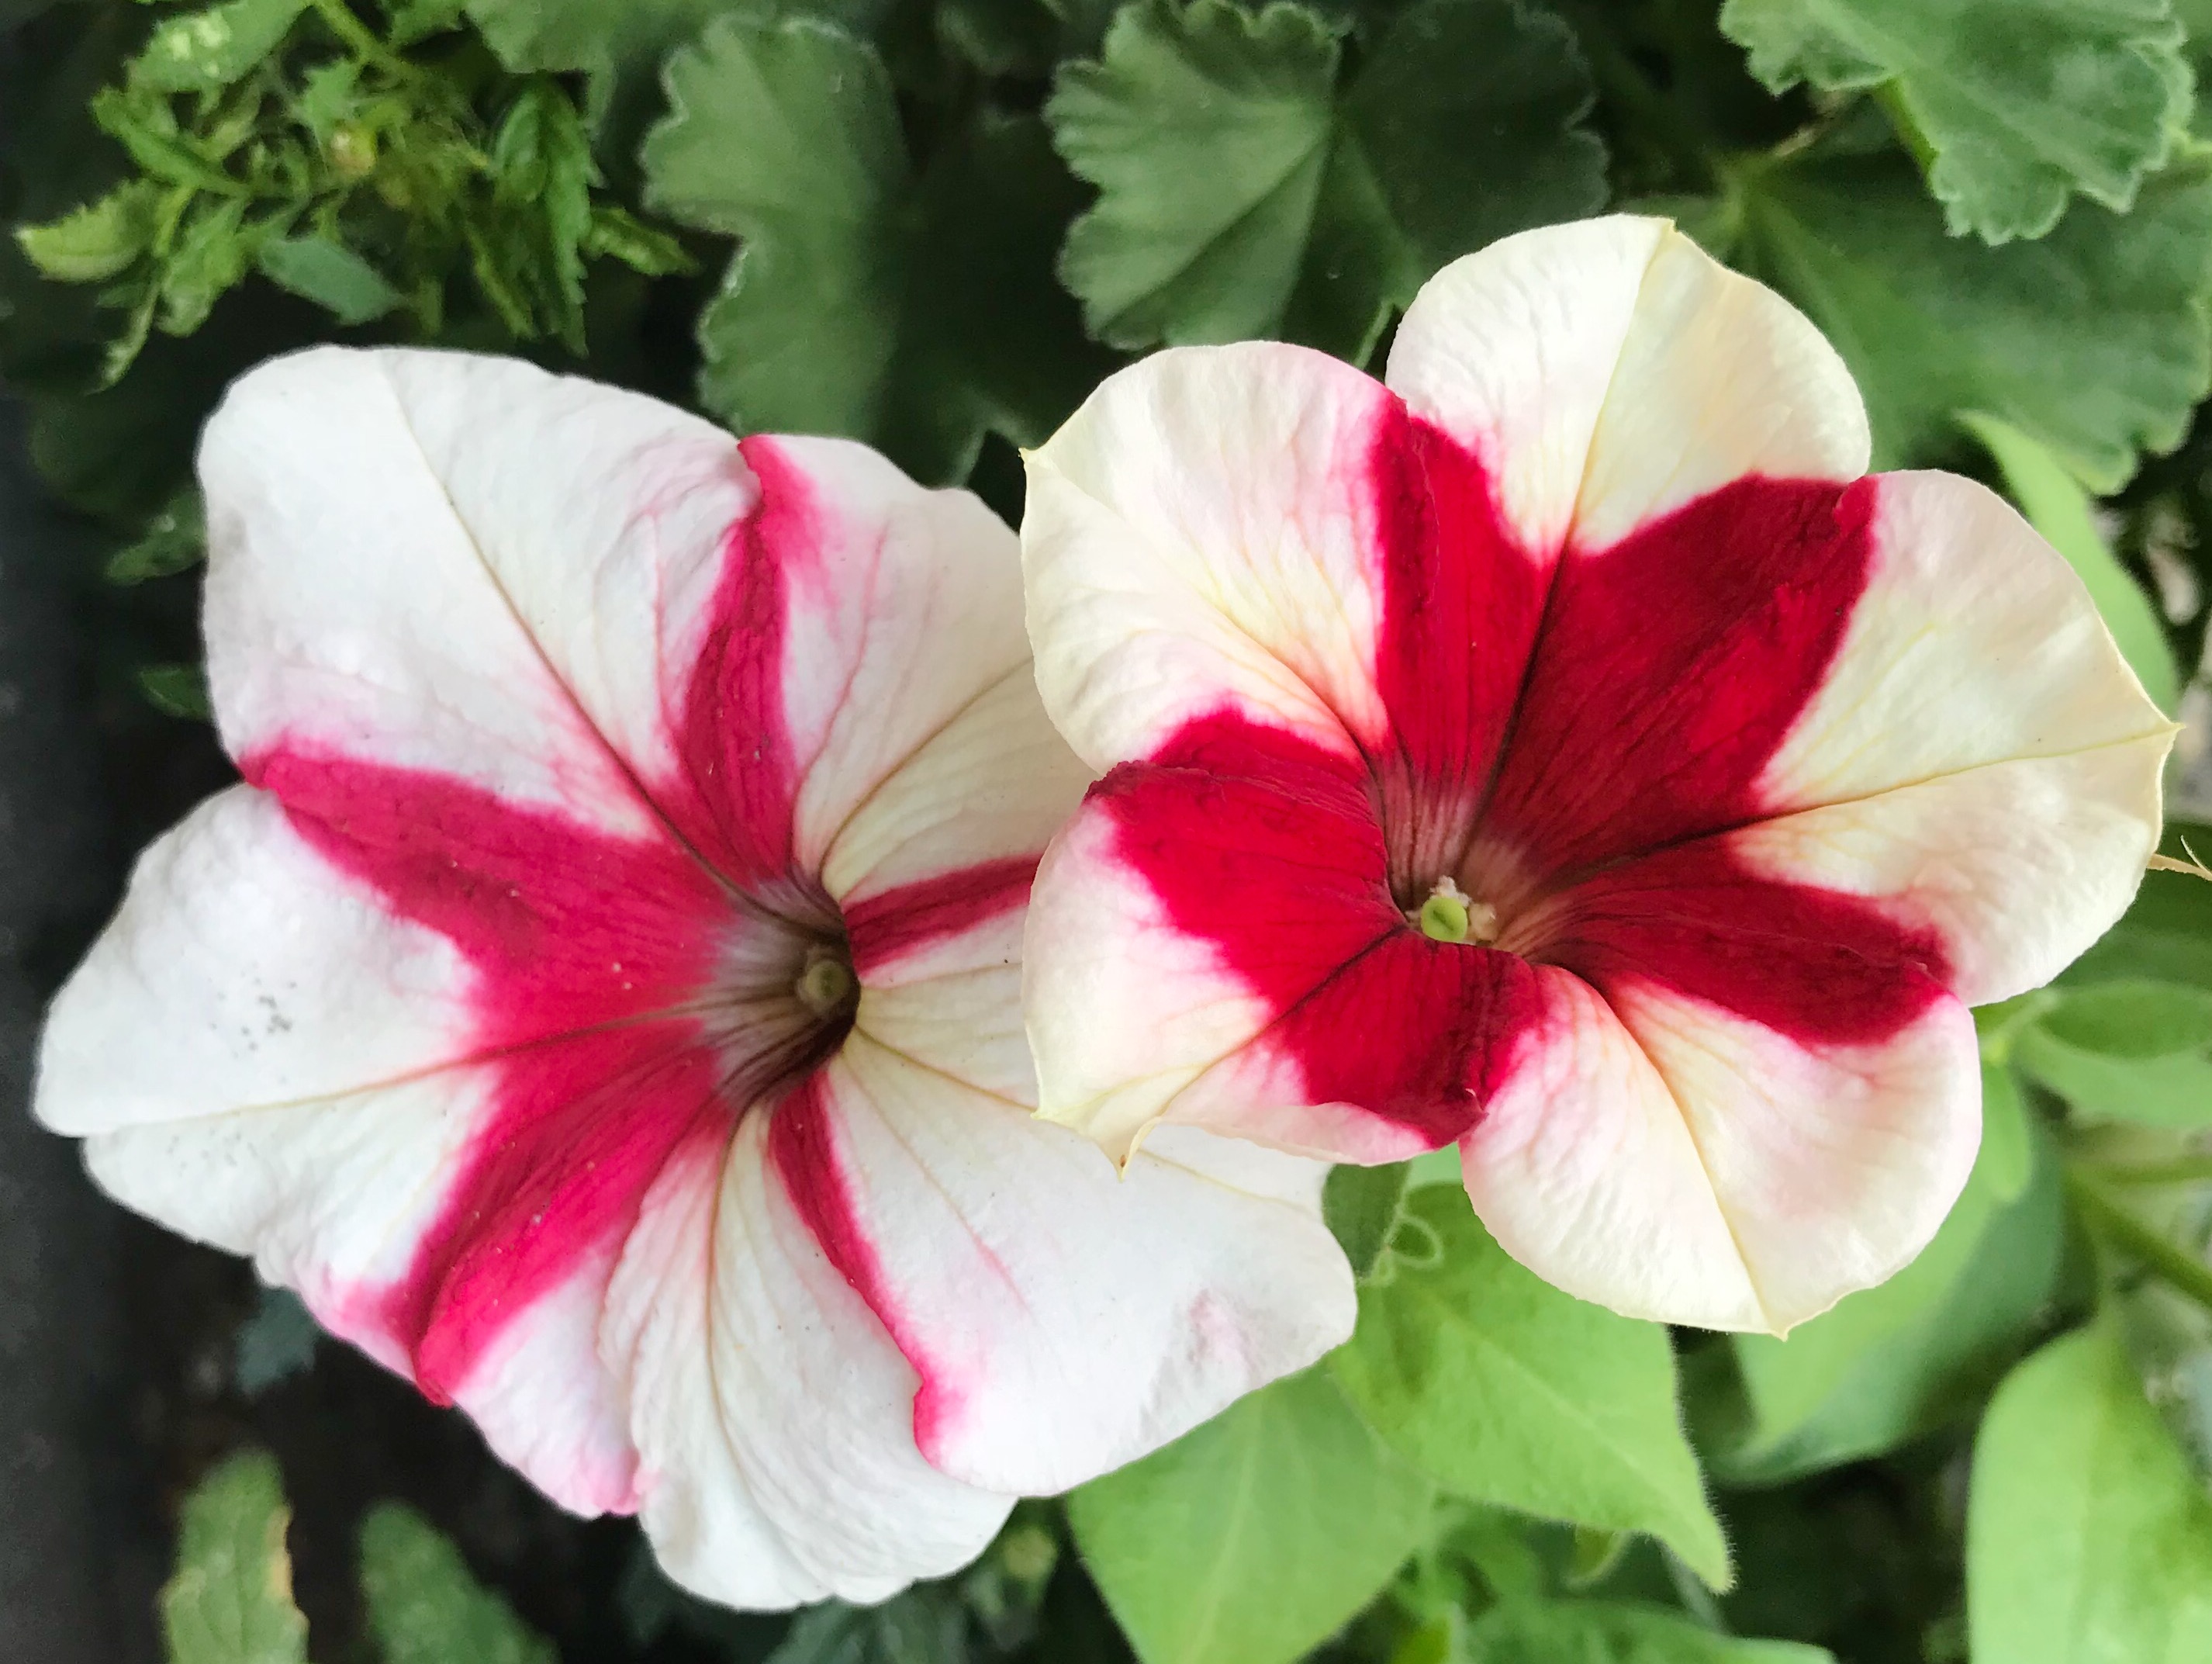 Red and white petunias